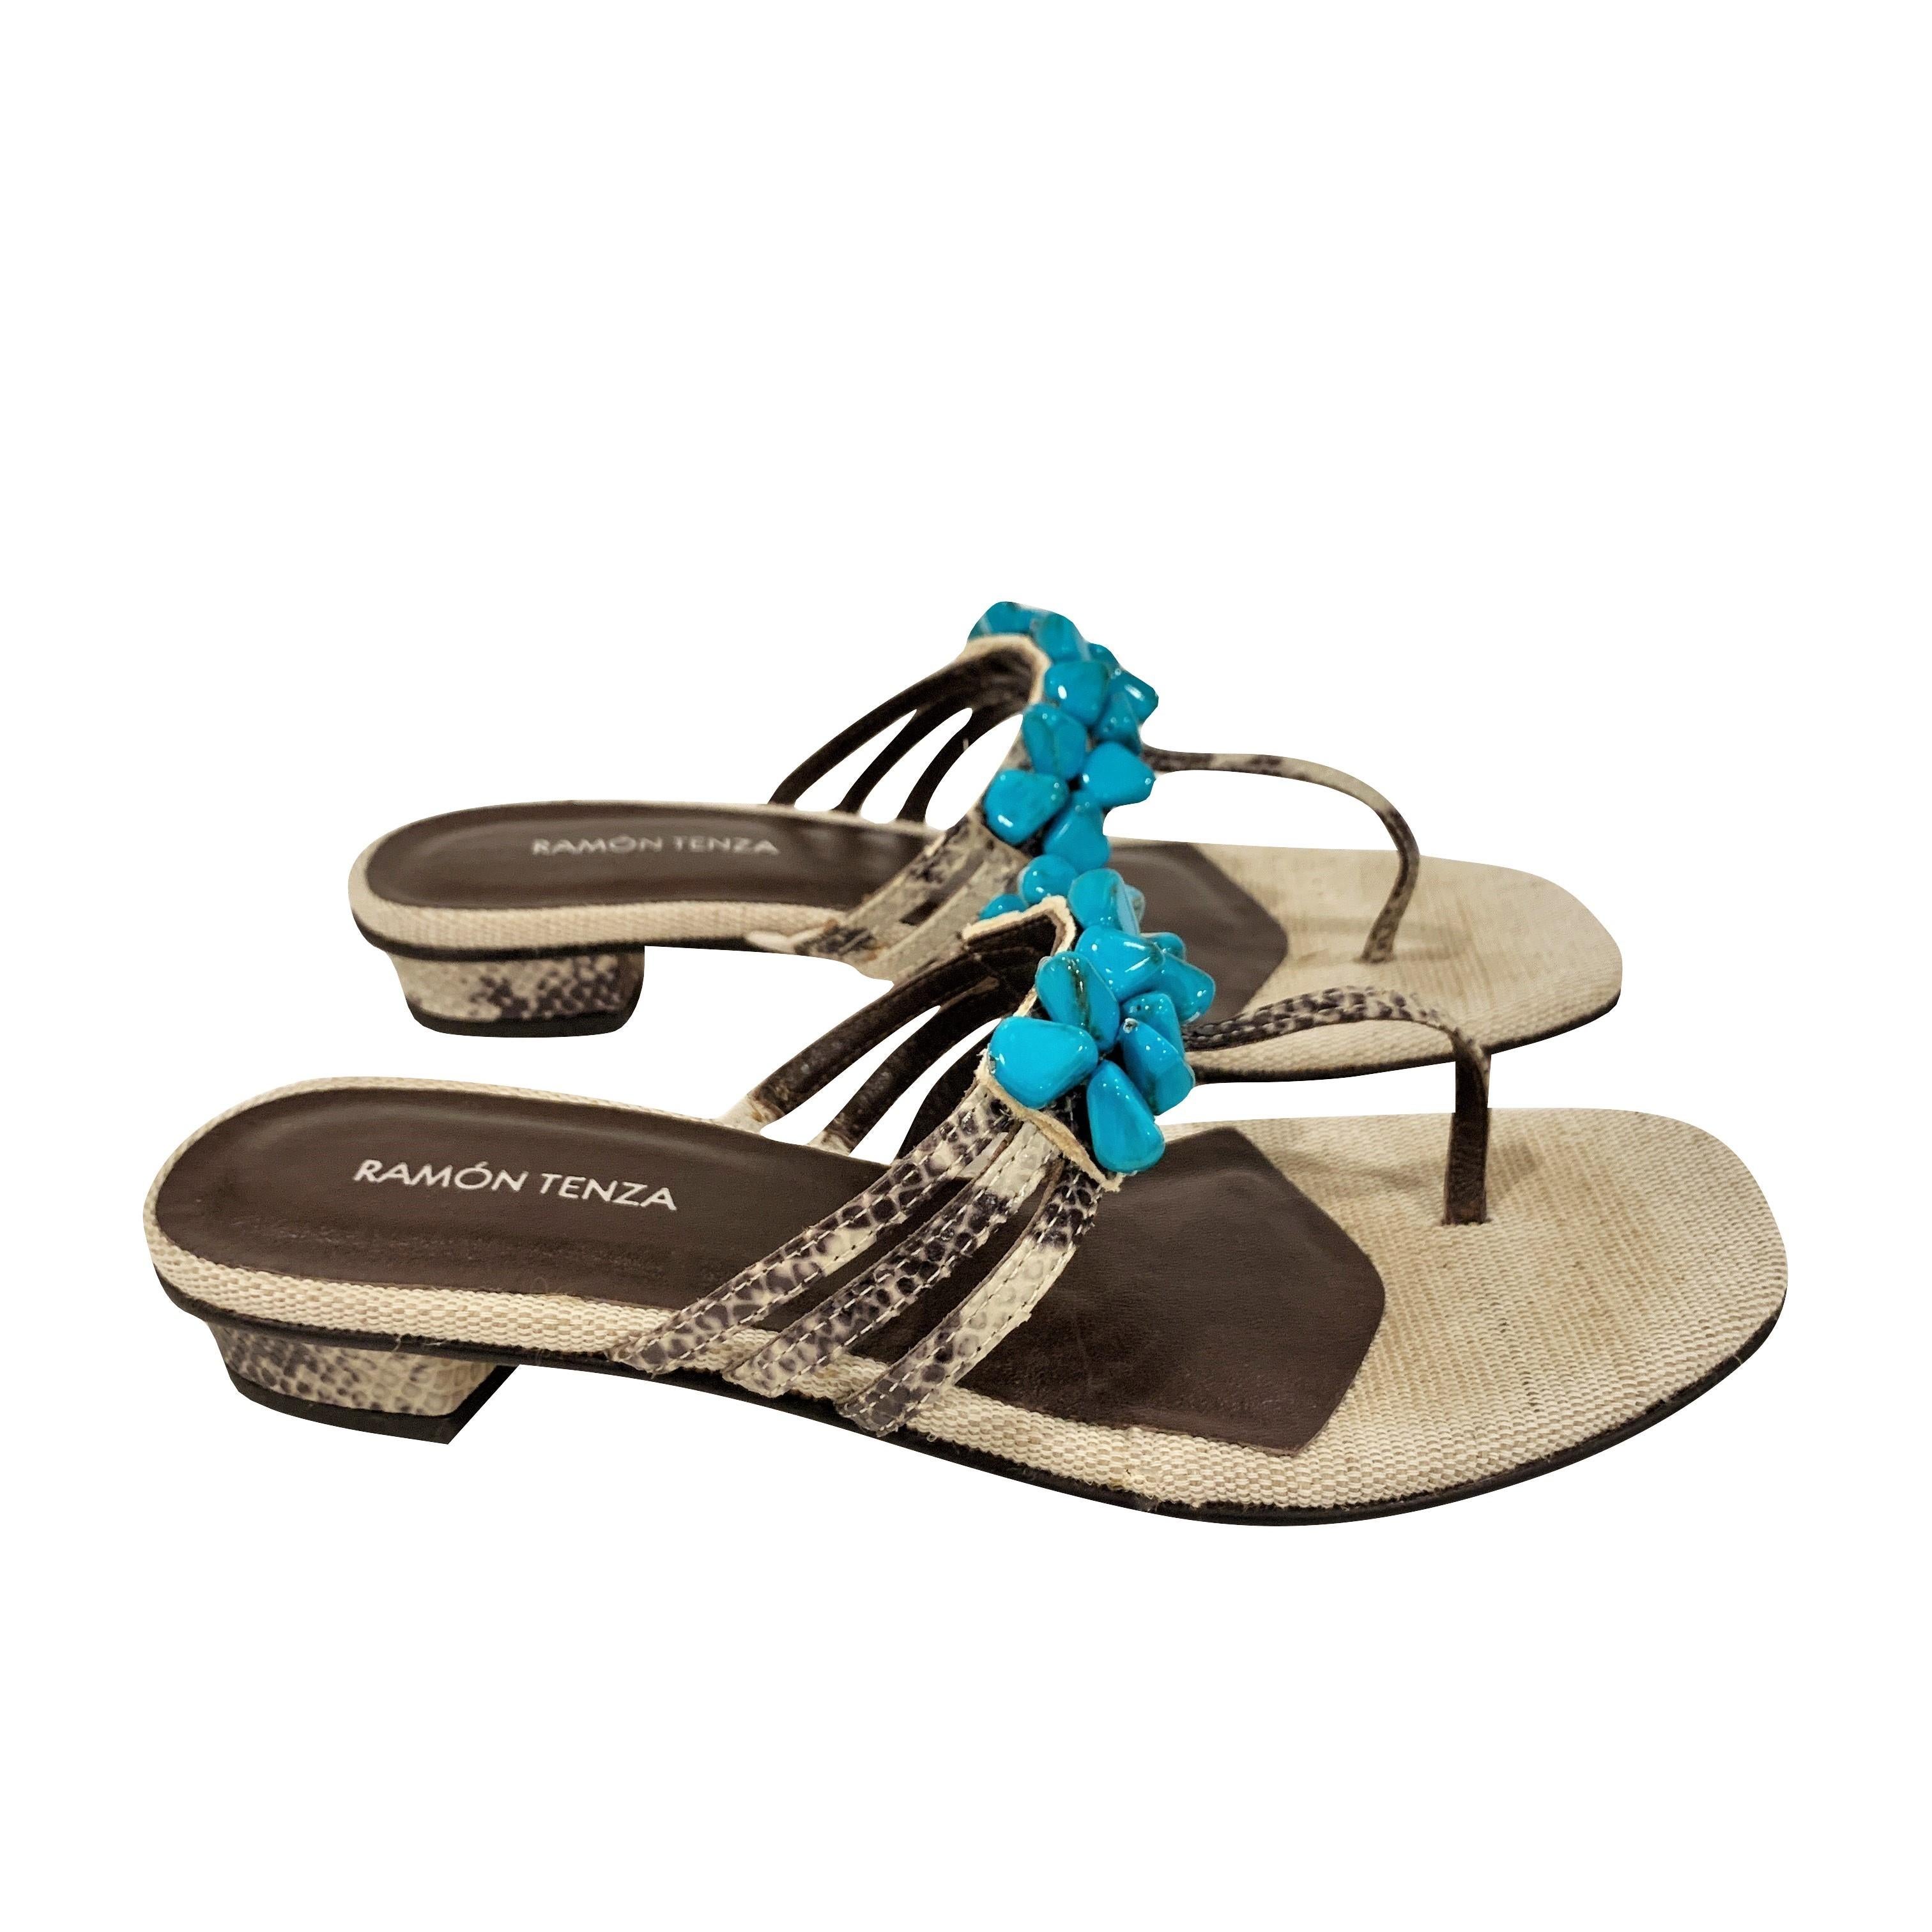 Ramon Tenza Spain
Brand New
Beige & Turquoise Thong Sandals
* Padded Leather Footbed
* Snakeskin Heel & Strap
* Faux Turquoise Beading
* Size: 6
* 1.25